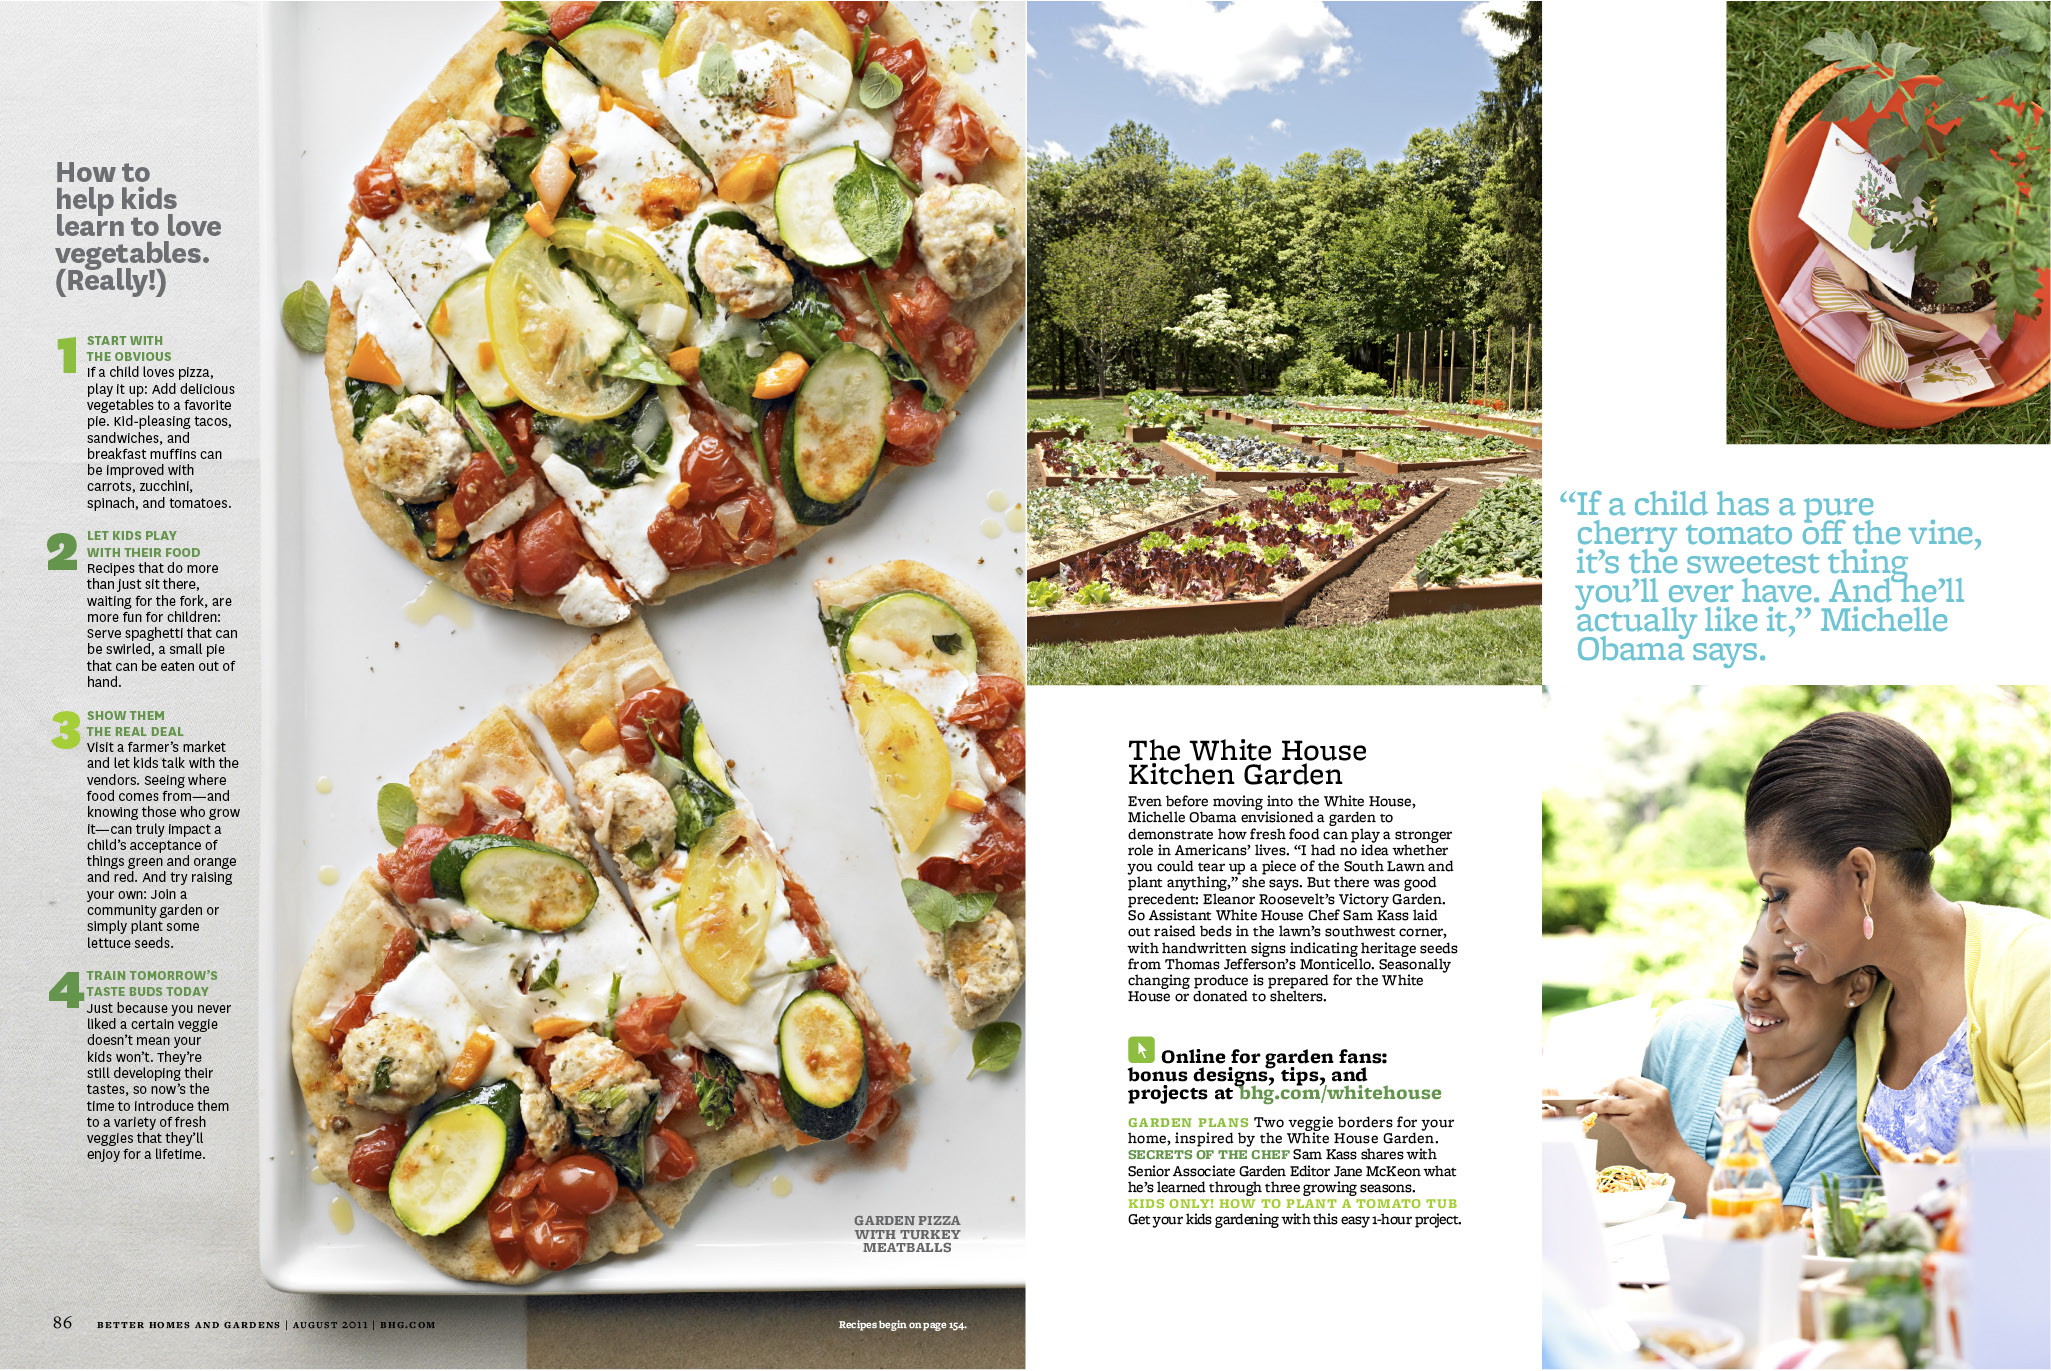 <strong>Growing Strong, Better Homes & Gardens Magazine</strong><br />Words: Meryl Gordon | Photos: Melanie Acevedo & Andy Lyons | Food Styling: Constance Pikulas & Jill Lust | Prop Styling: Sarah Cave | Recipes: Better Homes and Gardens Test Kitchen